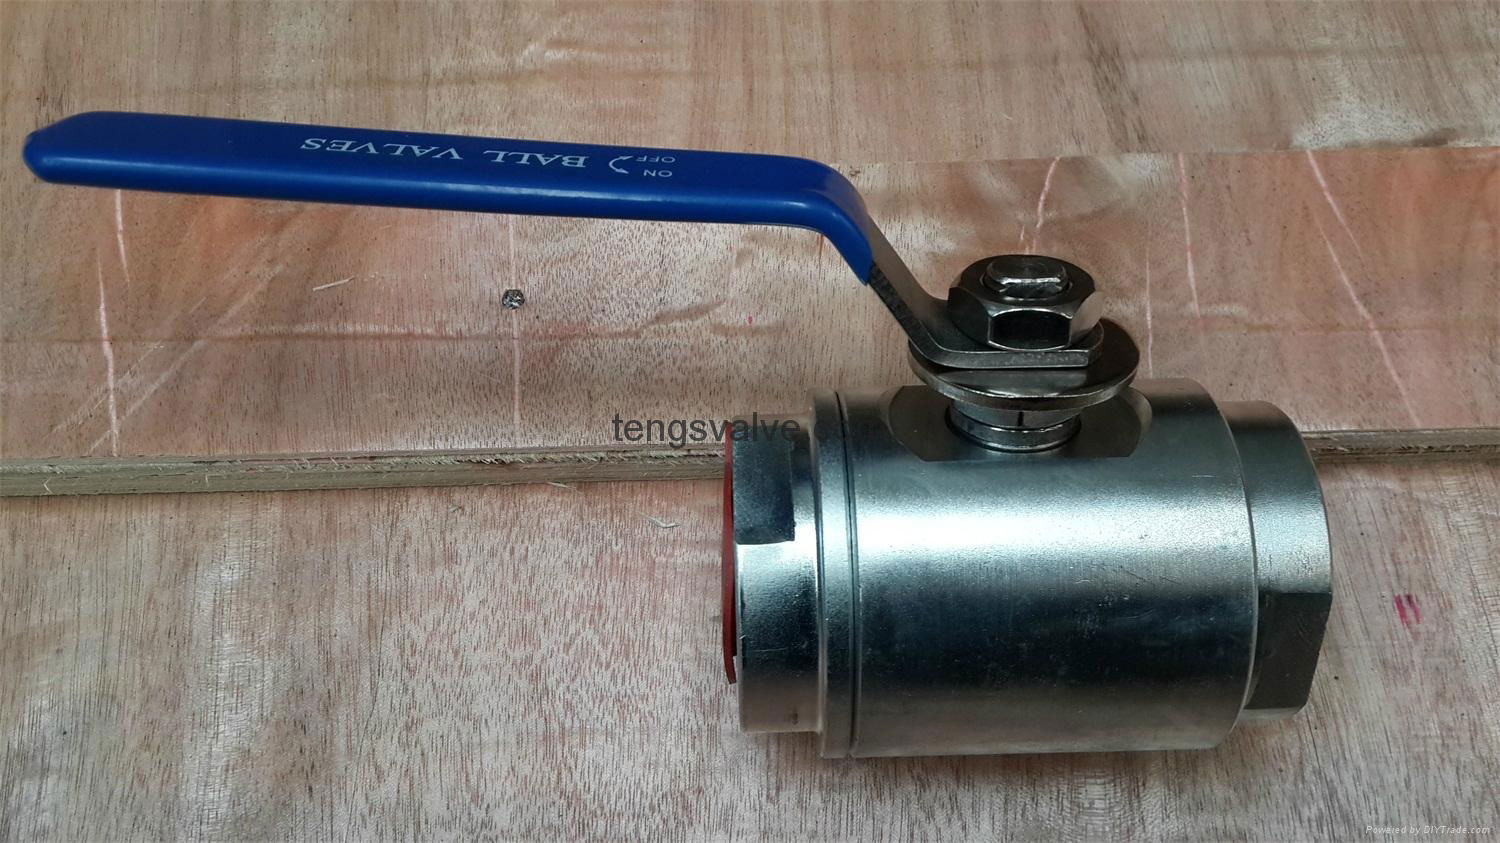 Forged steel screwed ends one pc ball valve